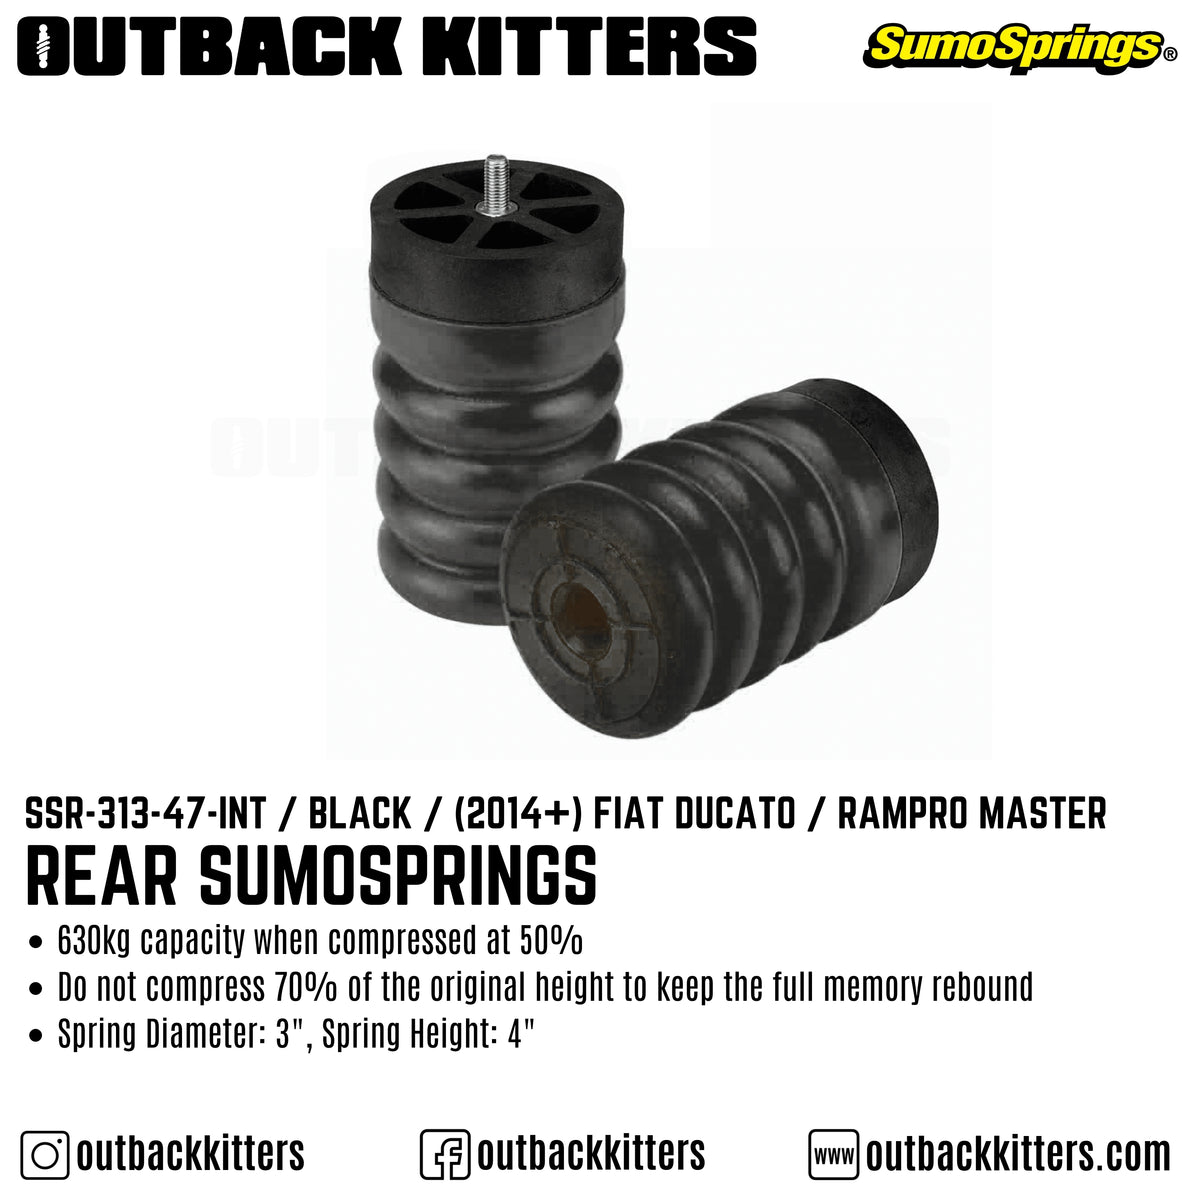 Rear SumoSprings to suit 2014+ Fiat Ducato / Ram Promaster - Outback Kitters